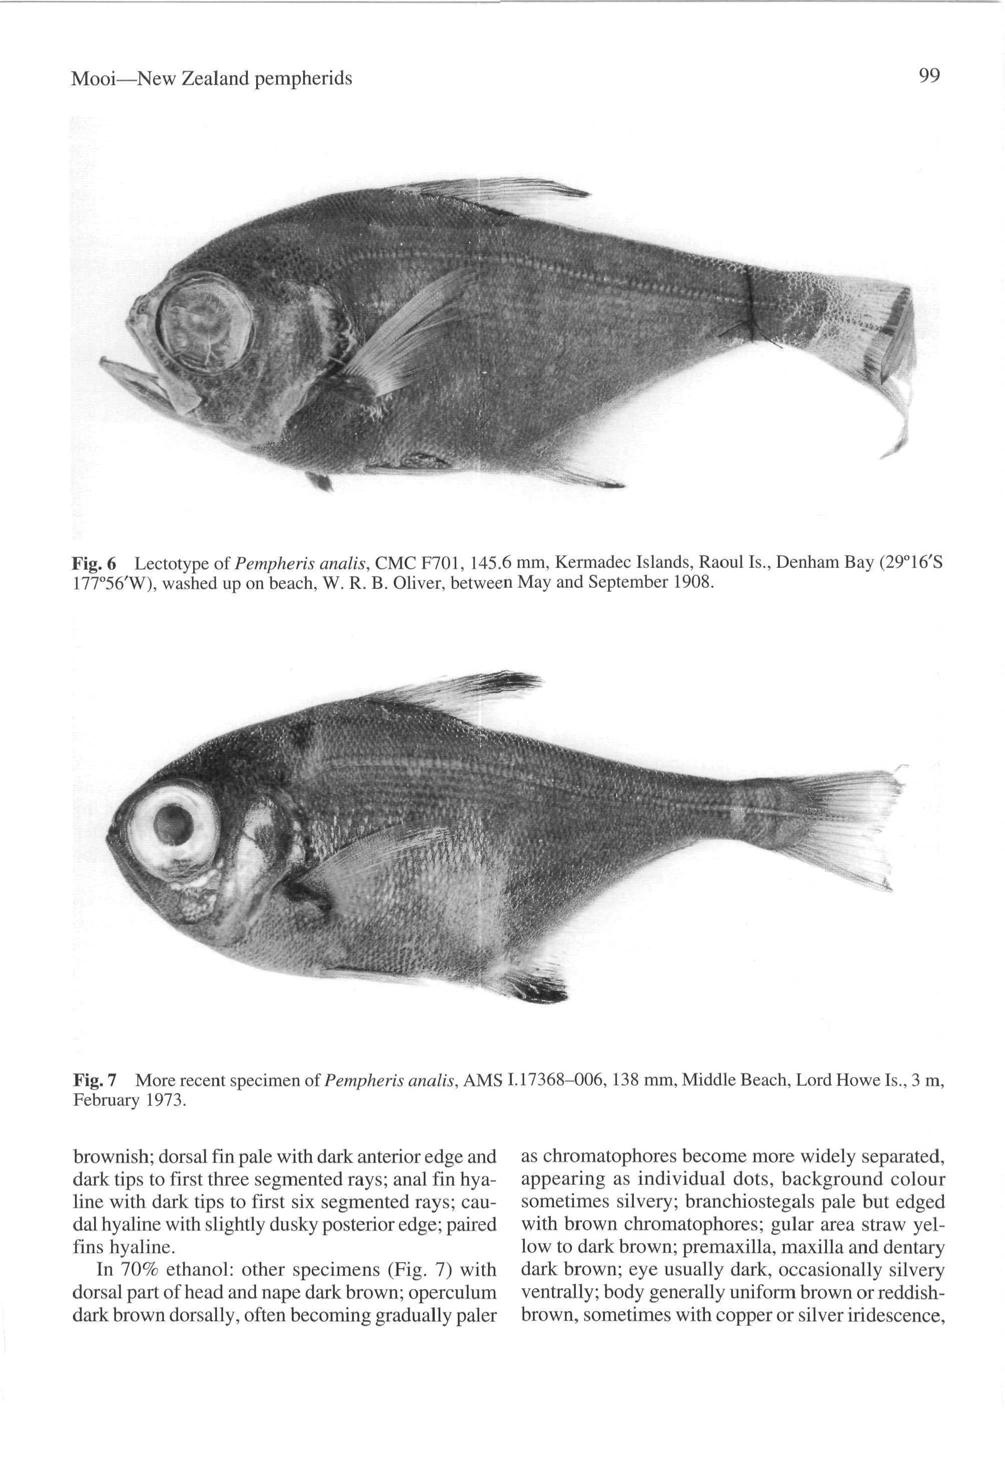 Mooi New Zealand pempherids 99 Fig. 6 Lectotype of Pempheris analis, CMC F701, 145.6 mm, Kermadec Islands, Raoul Is., Denham Bay (29 16'S 177 56'W), washed up on beach, W. R. B. Oliver, between May and September 1908.